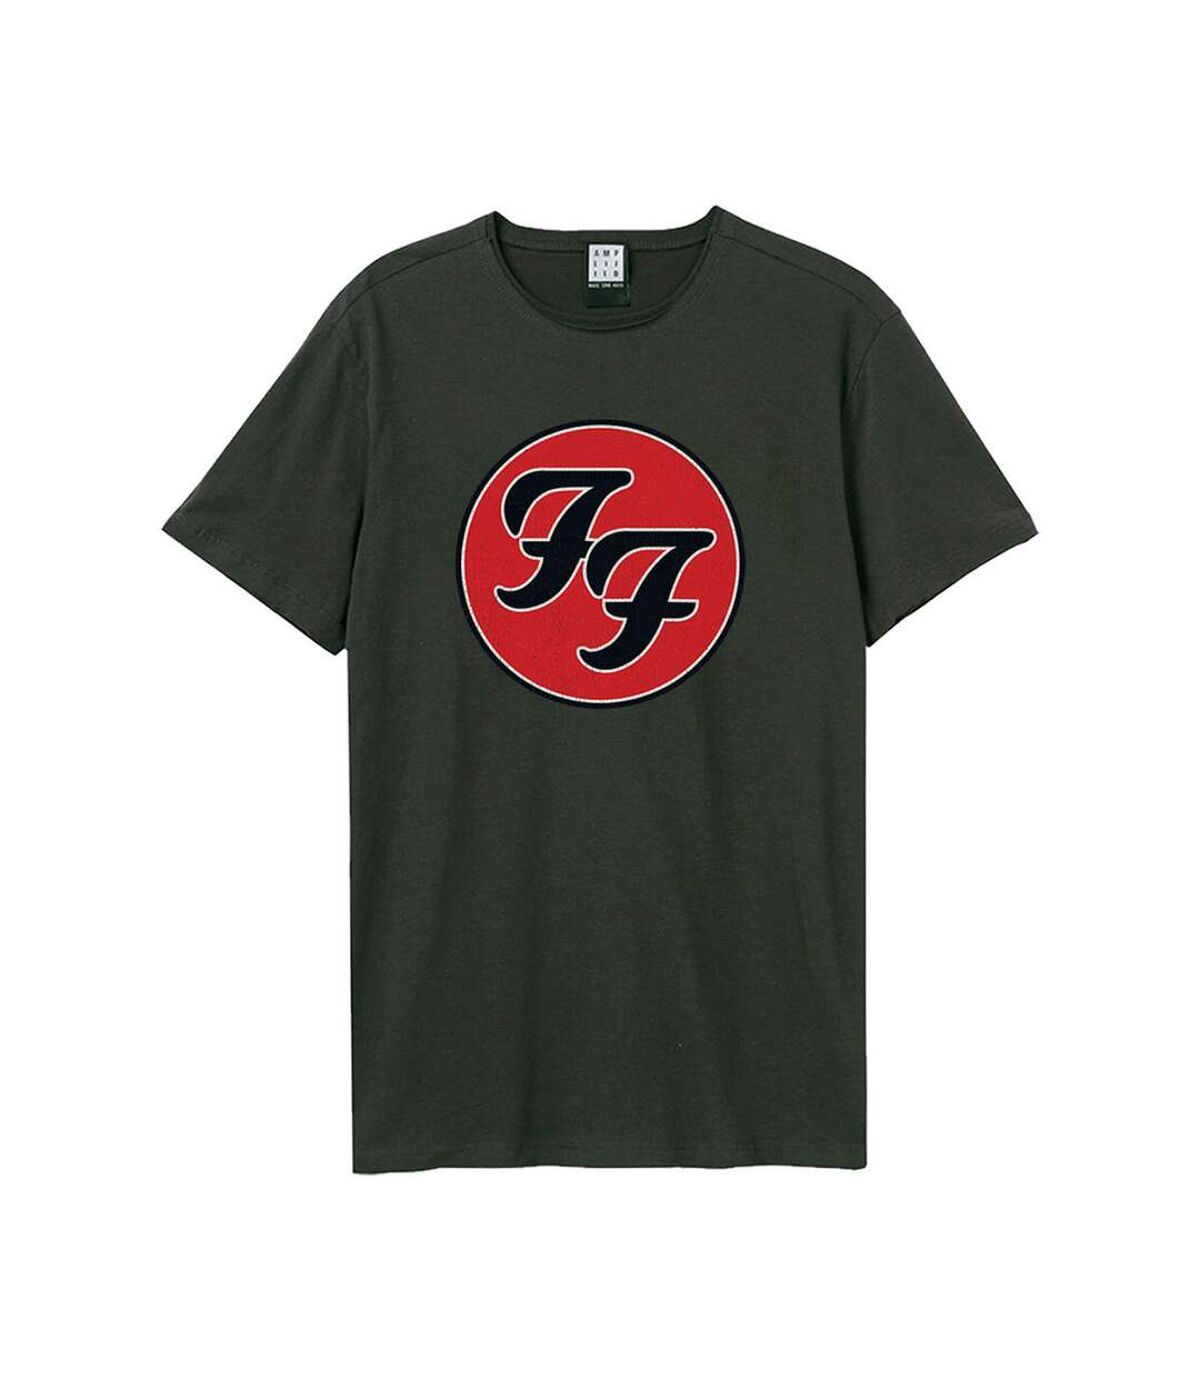 Amplified - T-shirt DOUBLE F LOGO - Adulte (Anthracite) - UTGD839